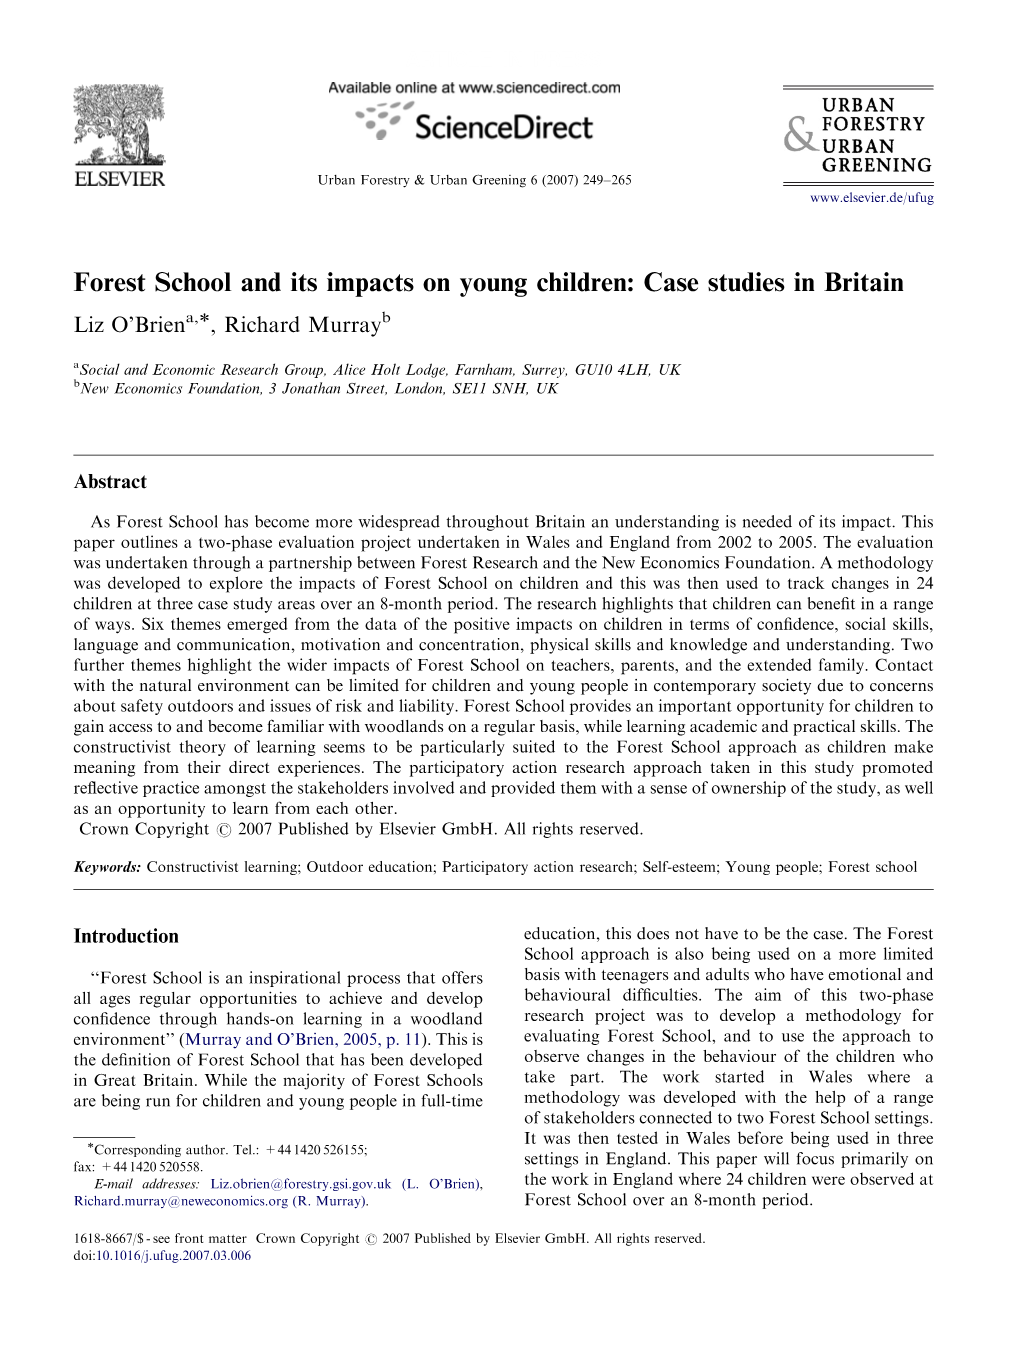 Forest School and Its Impacts on Young